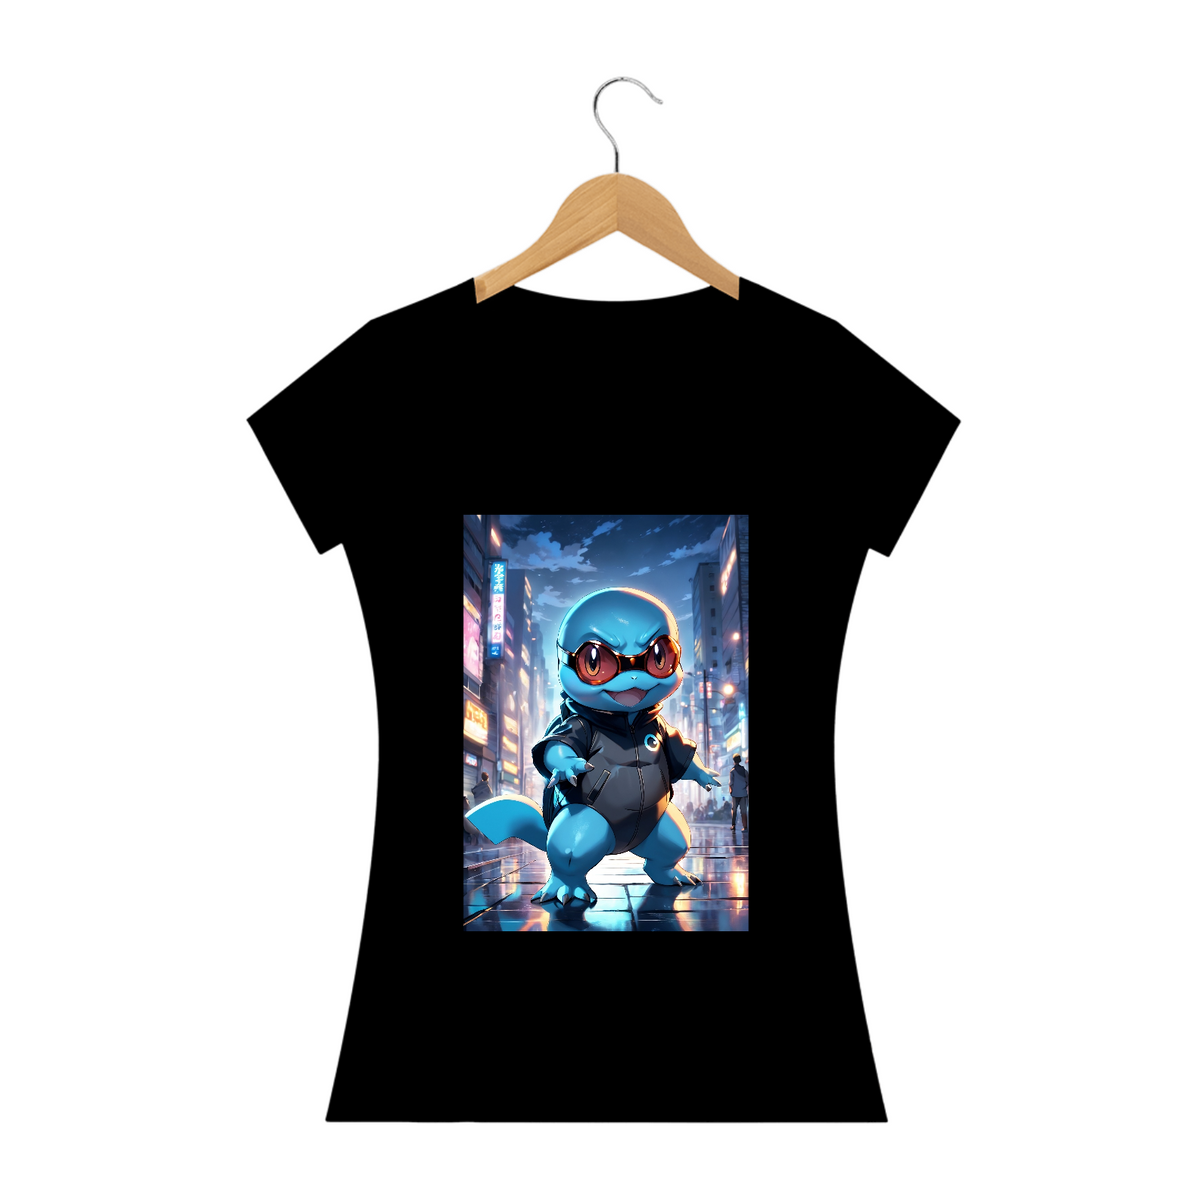 Nome do produto: Camisa Baby long Squirtle